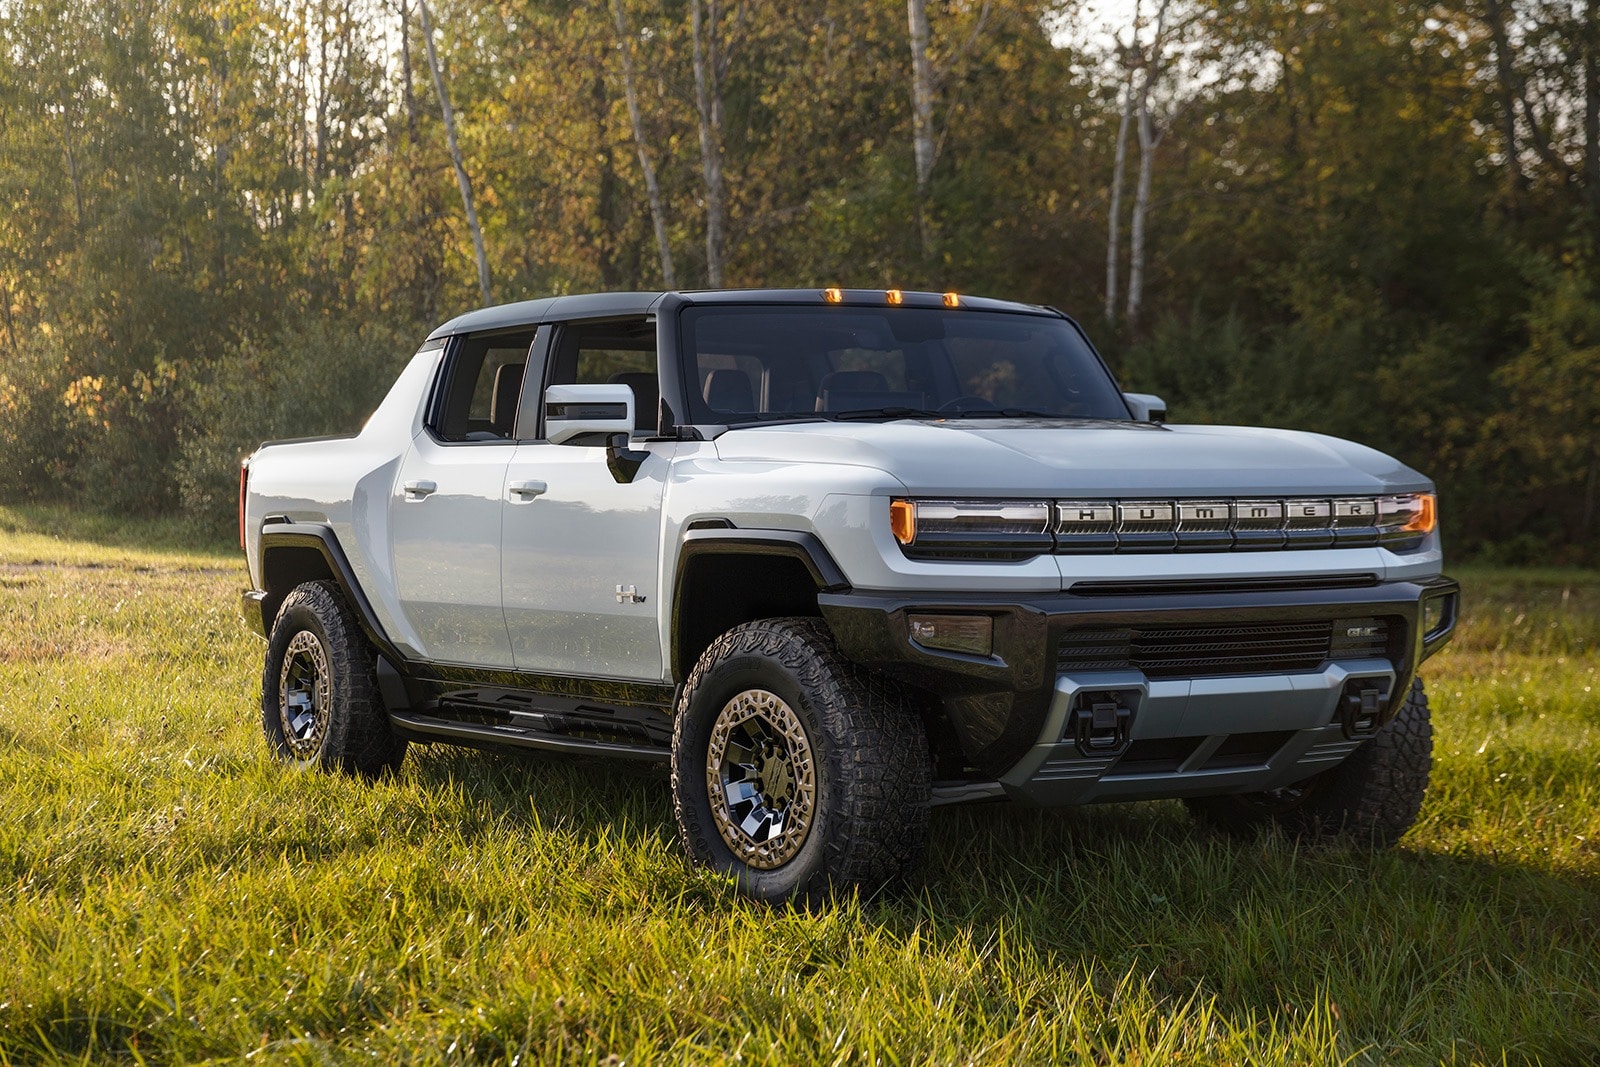 Forget Everything You Thought About Hummer: The 2022 GMC Hummer EV Redeems Itself in Epic Fashion